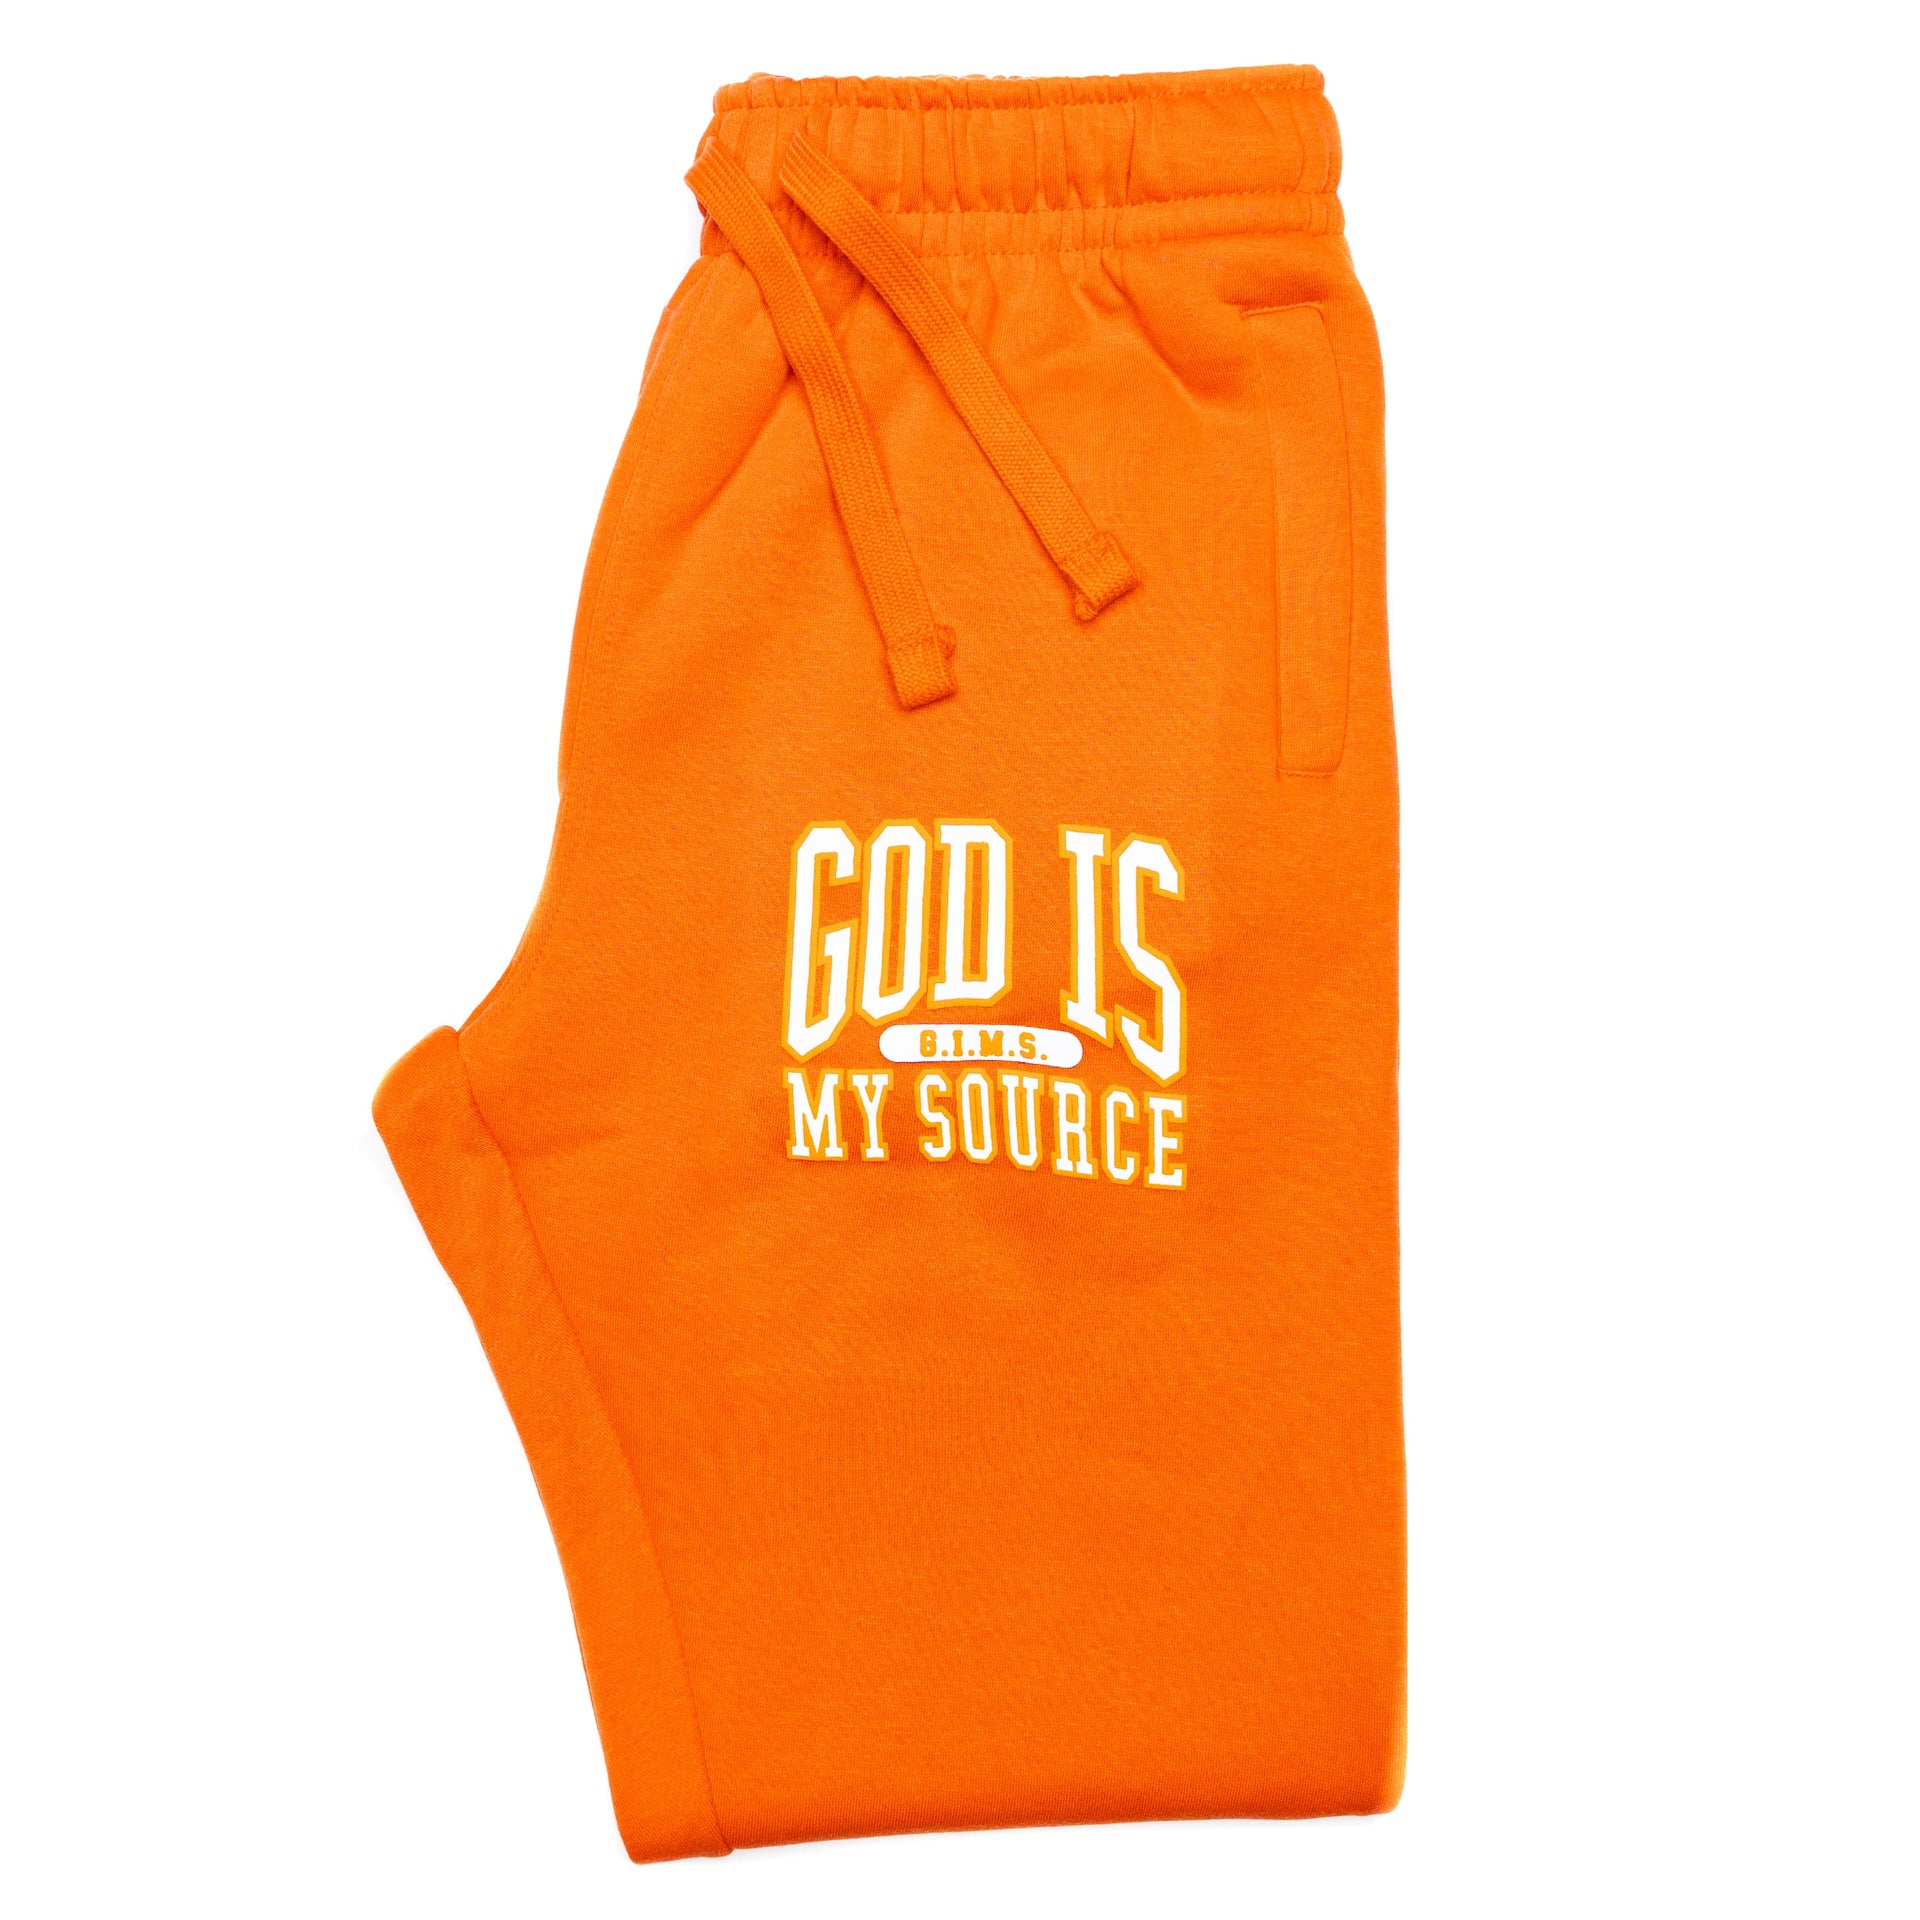 God Is My Source 'Campus' Joggers Orange / White - God Is My Source